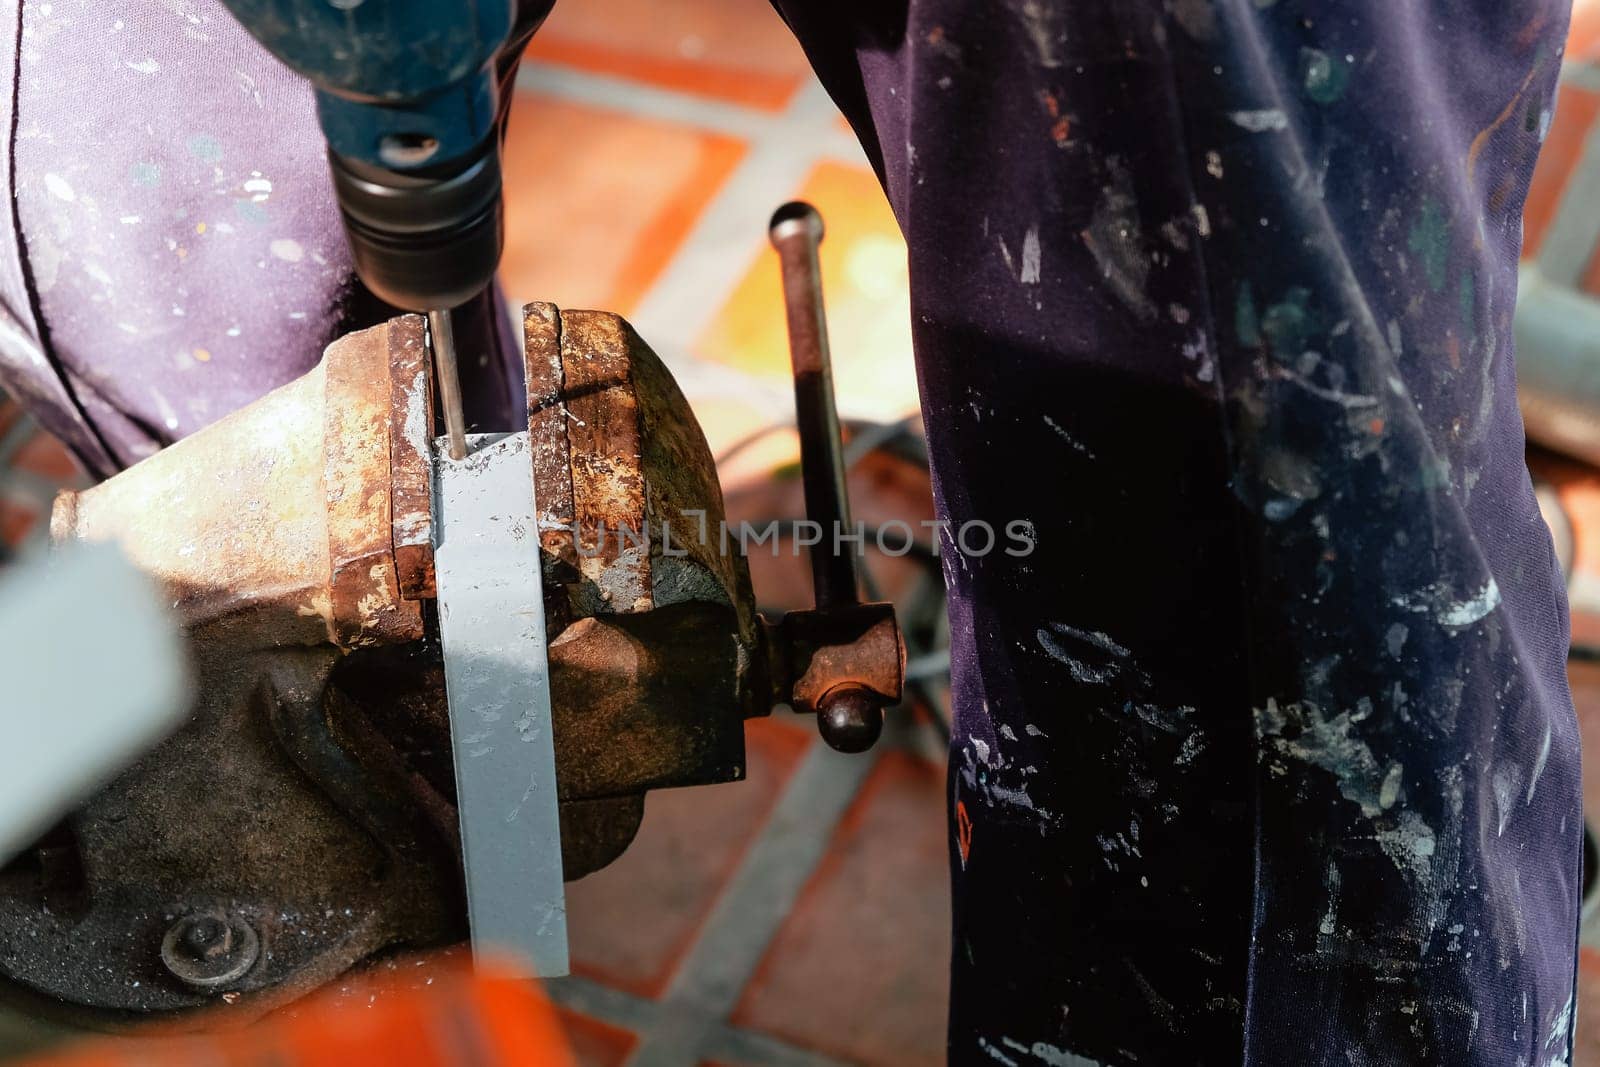 Metalworker working on a drilling machine by ponsulak